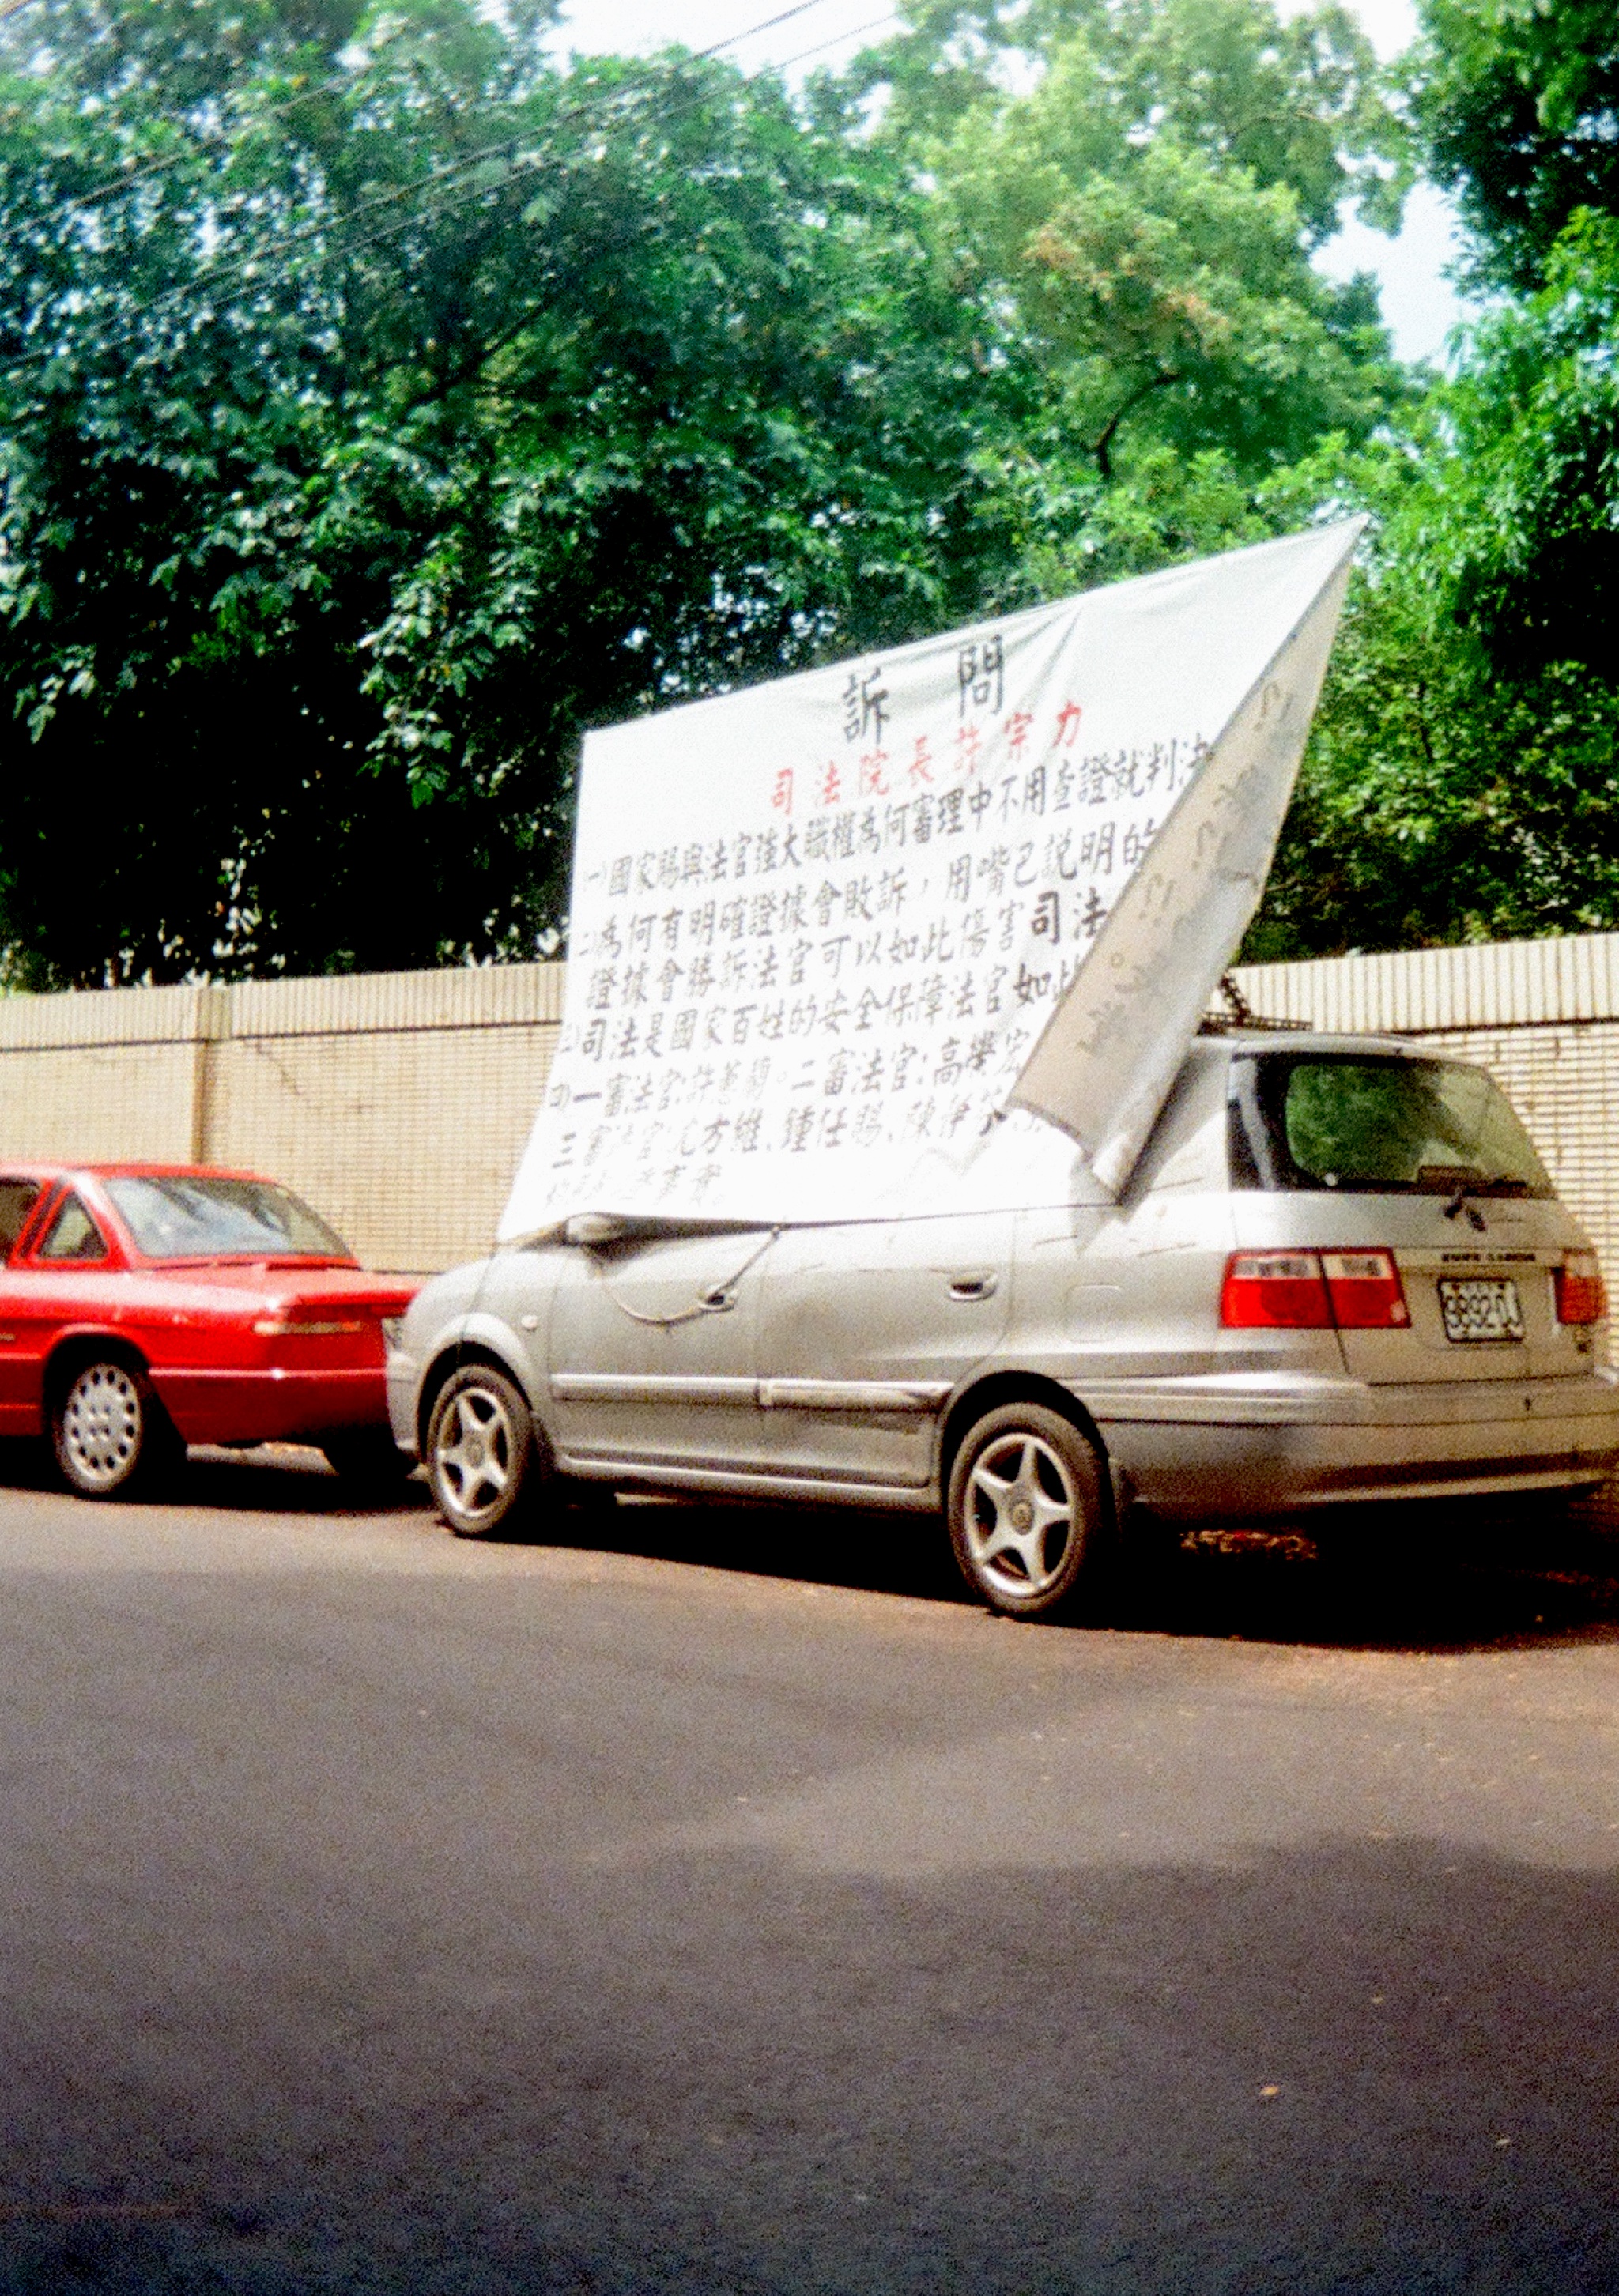 A parked car with a banner hanging on top of it, covering the driver's side. Banner reads some complaints about the judiciary systems.